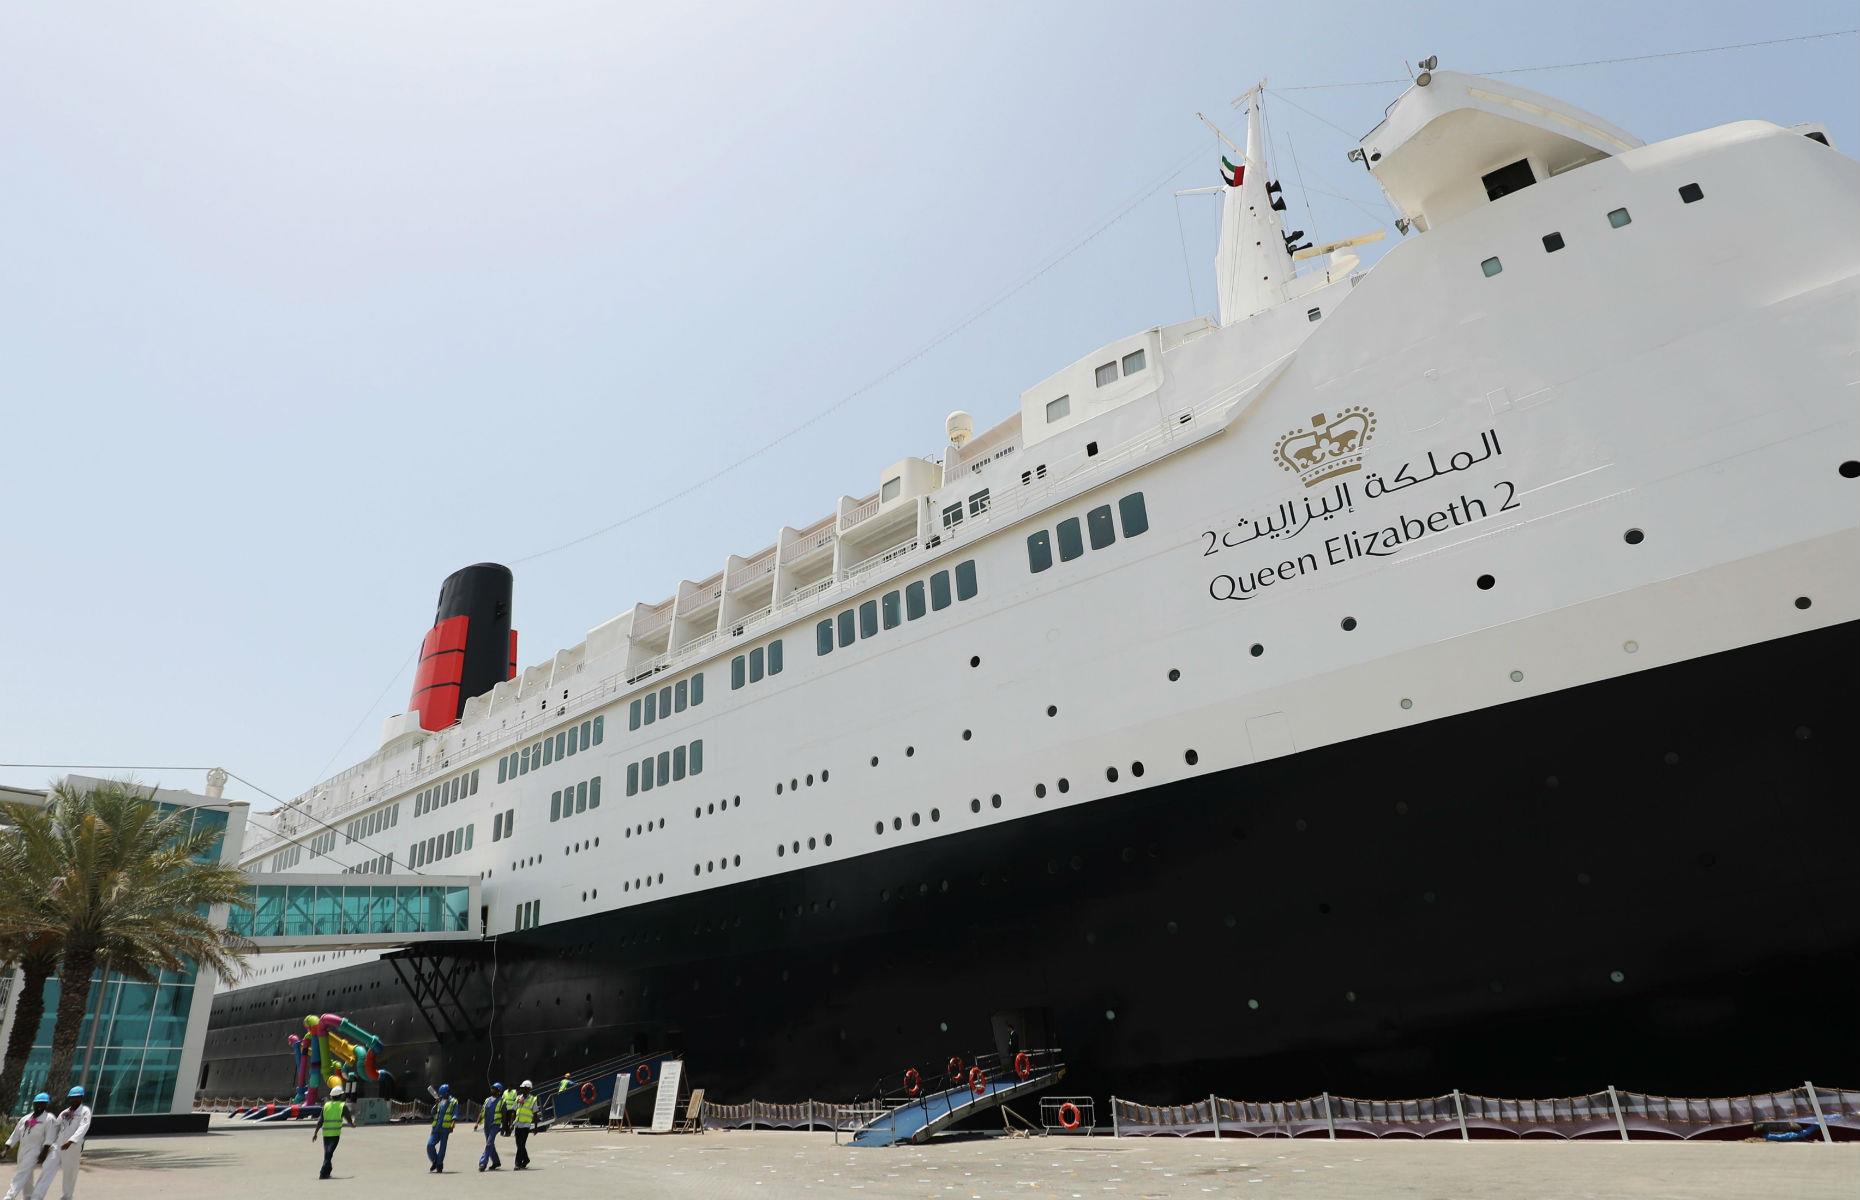 <p>In 2007, the QE2 was sold to Dubai government investment company Istithmar World for £78 million ($100m). Despite standing for almost a decade untouched in the Mina Rashid marina after initial refurbishment plans were shelved, work on transforming the QE2 into a <a href="https://www.booking.com/hotel/ae/queen-elizabeth-2.en-gb.html?aid=1280739" rel="nofollow">luxury static hotel</a> finally began in 2017. Just a year later, the 13-deck venue welcomed its first visitors. The monumental destination offers heritage tours where you can glimpse the original rooms and artefacts from its time at sea. It's located in good company too, as nearby attractions include the Burj Khalifa, Dubai Mall and the Gold Souk.</p>  <p><a href="https://www.loveexploring.com/guides/78199/explore-dubai-what-to-see-top-hotels-and-the-best-restaurants"><strong>The best places to visit in Dubai</strong></a></p>